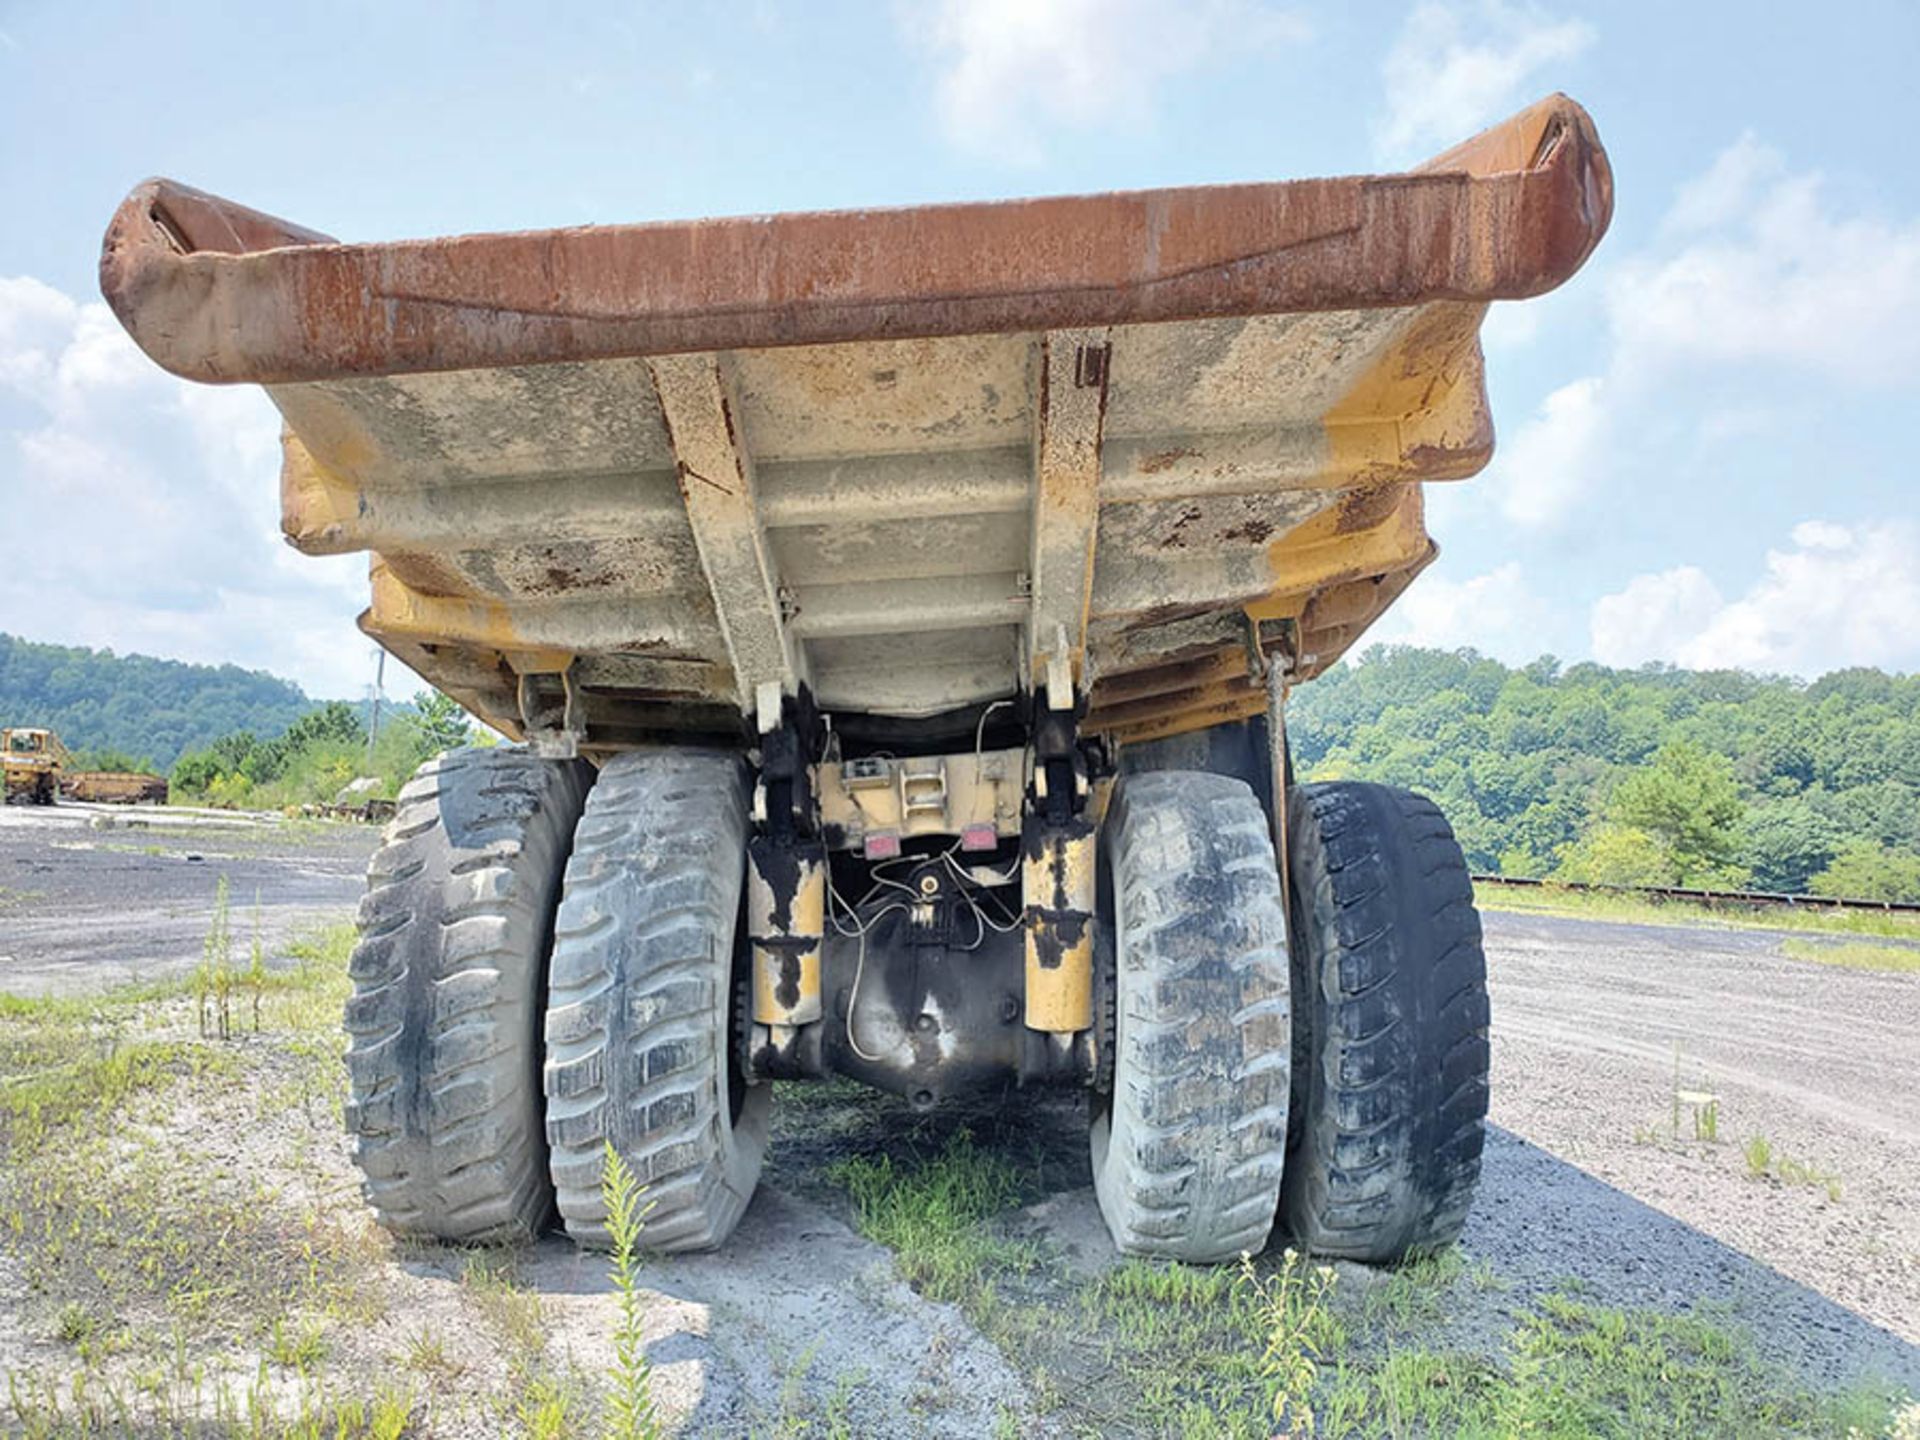 CATERPILLAR 773B OFF-ROAD DUMP TRUCK, S/N: 63W01175, 45,029 HRS.,21.00-35 TIRES, CAT 12-CYLINDER - Image 7 of 7